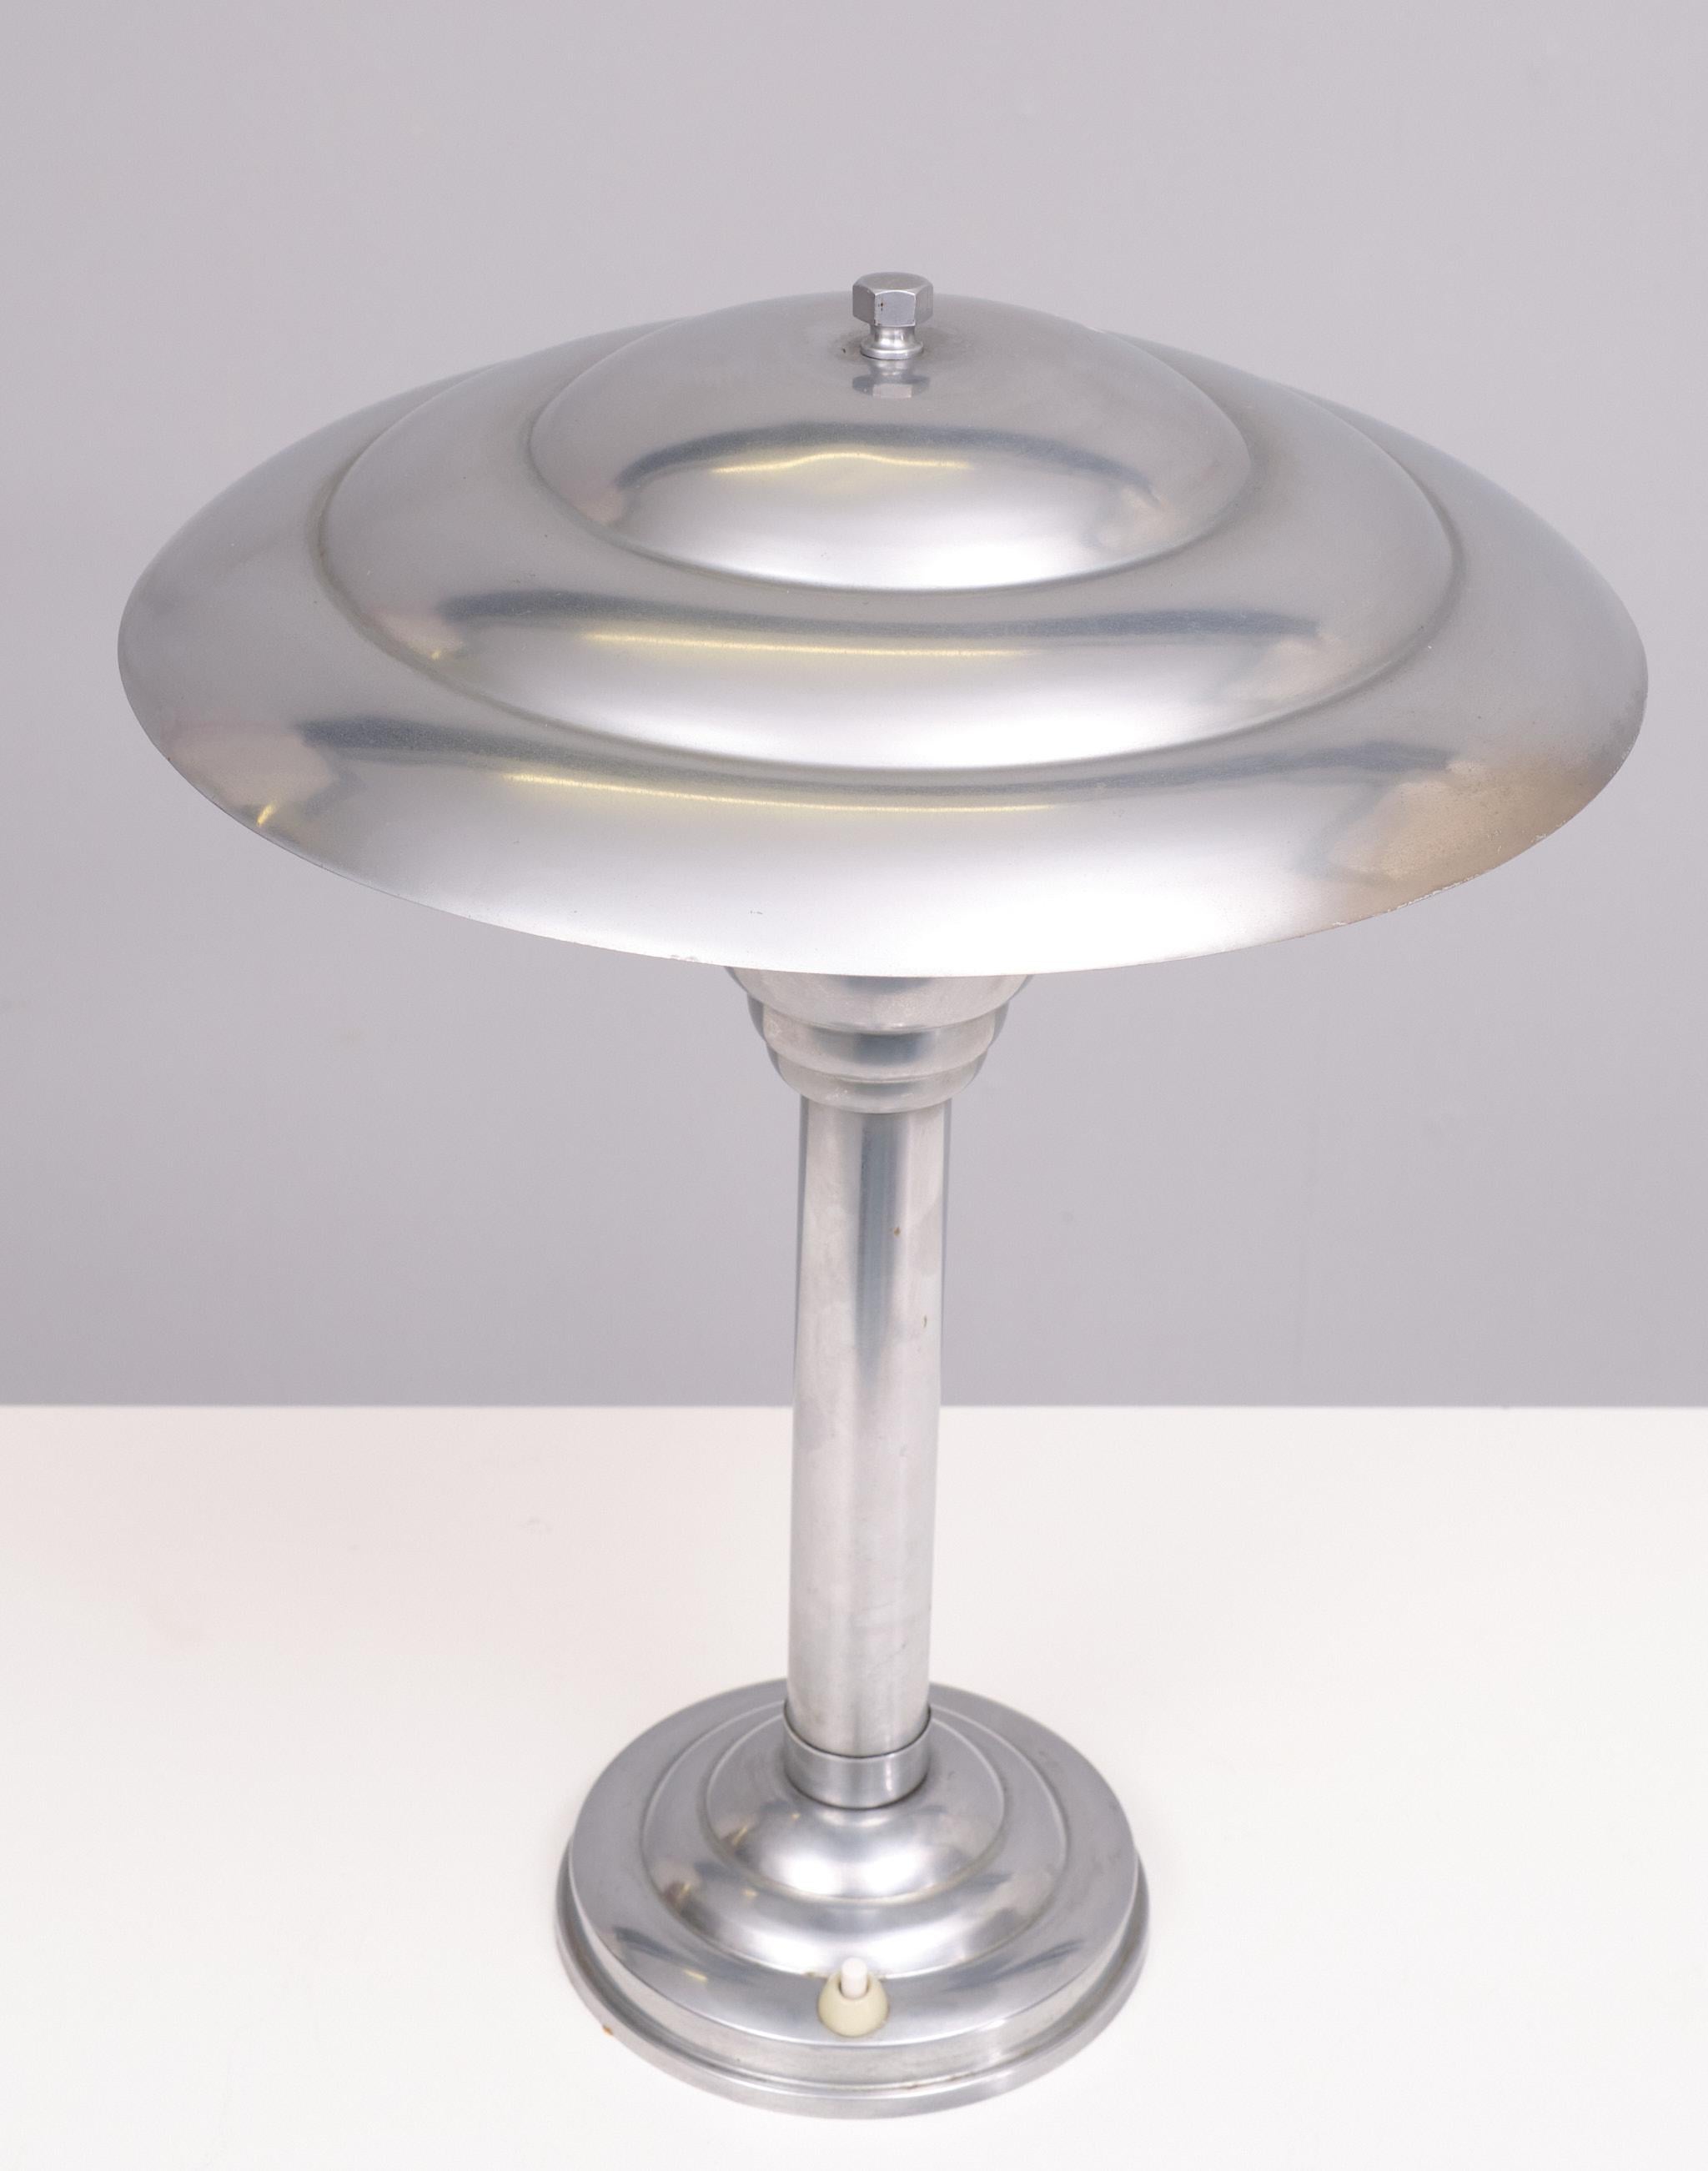 Original Art Deco Nickel table lamp . Comes with a ball joint in top of the shade .
Still in a very good condition .One large E27 bulb needed . 